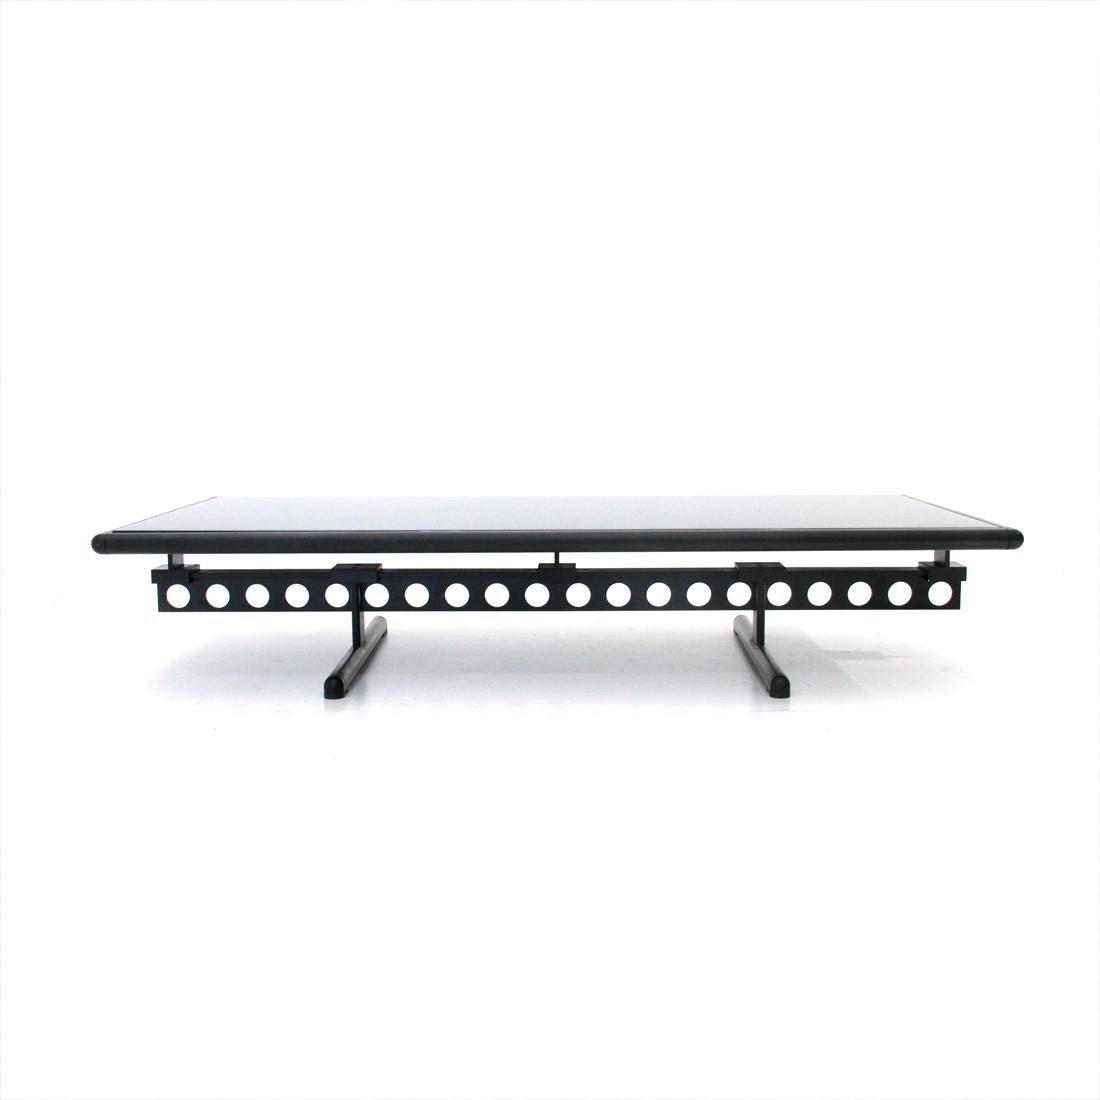 Grosso coffee table produced by Poltrona Frau in the 1980s, designed by Pierluigi Cerri.
Structure in black painted steel section.
Black slate top framed in black painted metal.
Good general conditions, some signs due to normal use over time,